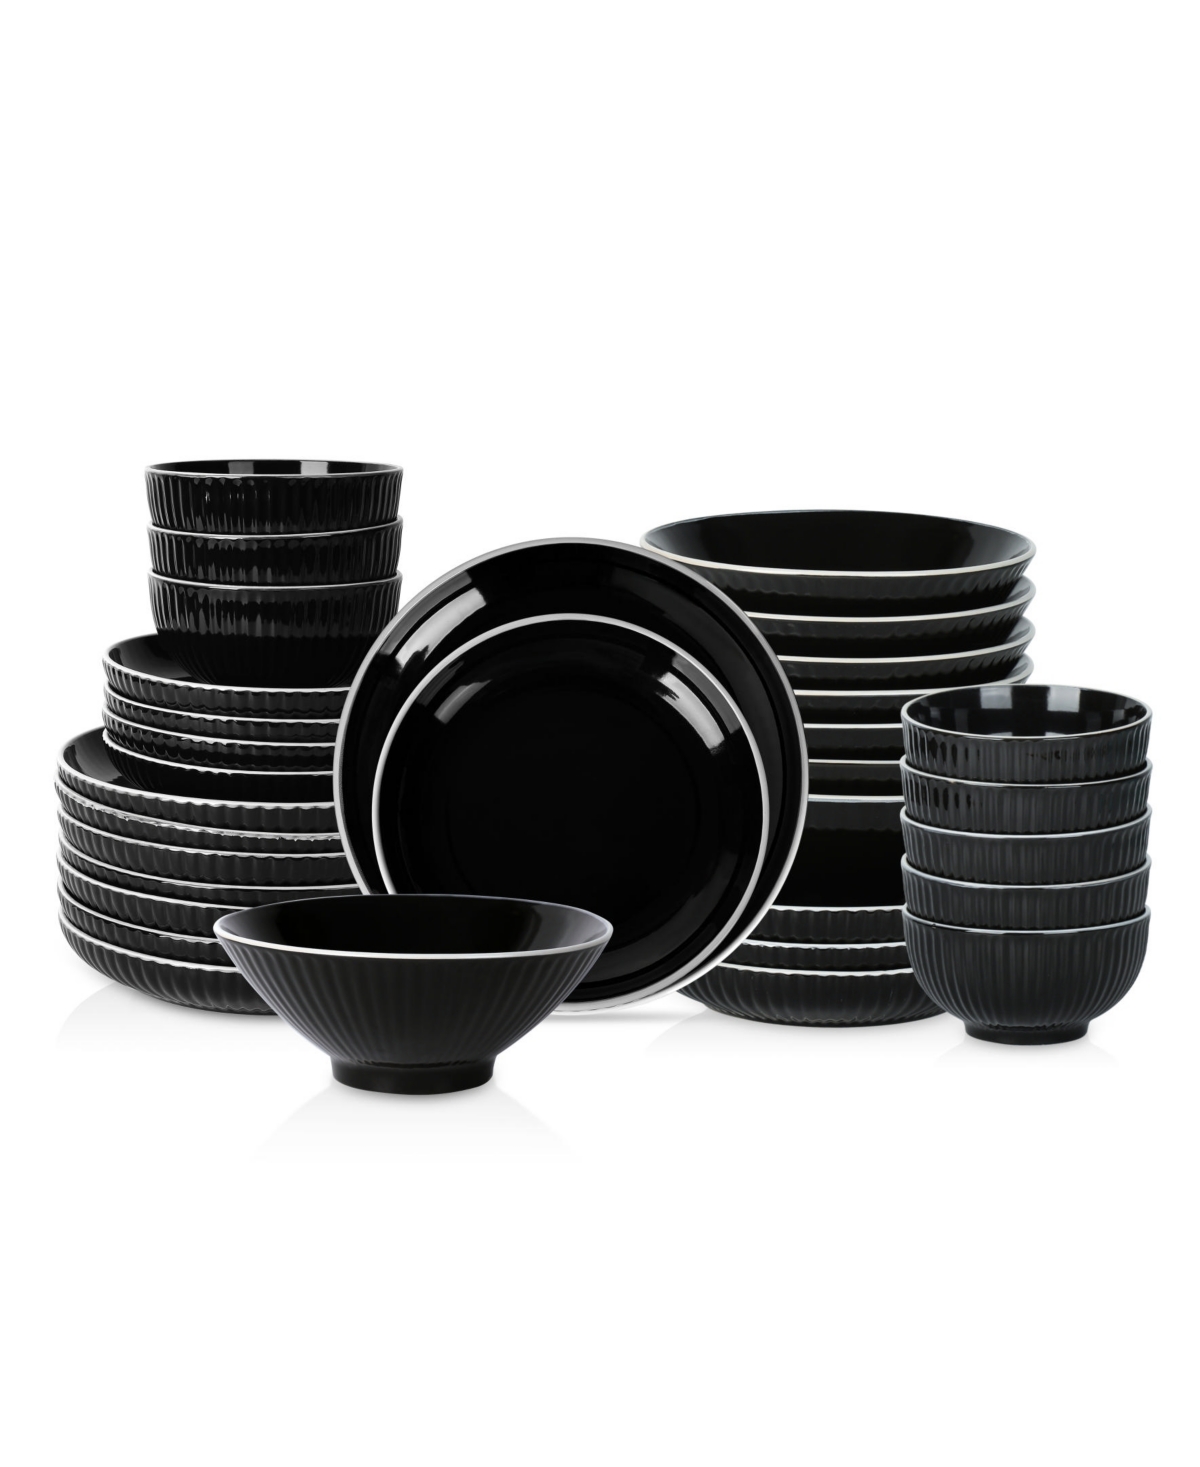 Lustra Stoneware 32 Pc. Set, Service for 8 - Teal